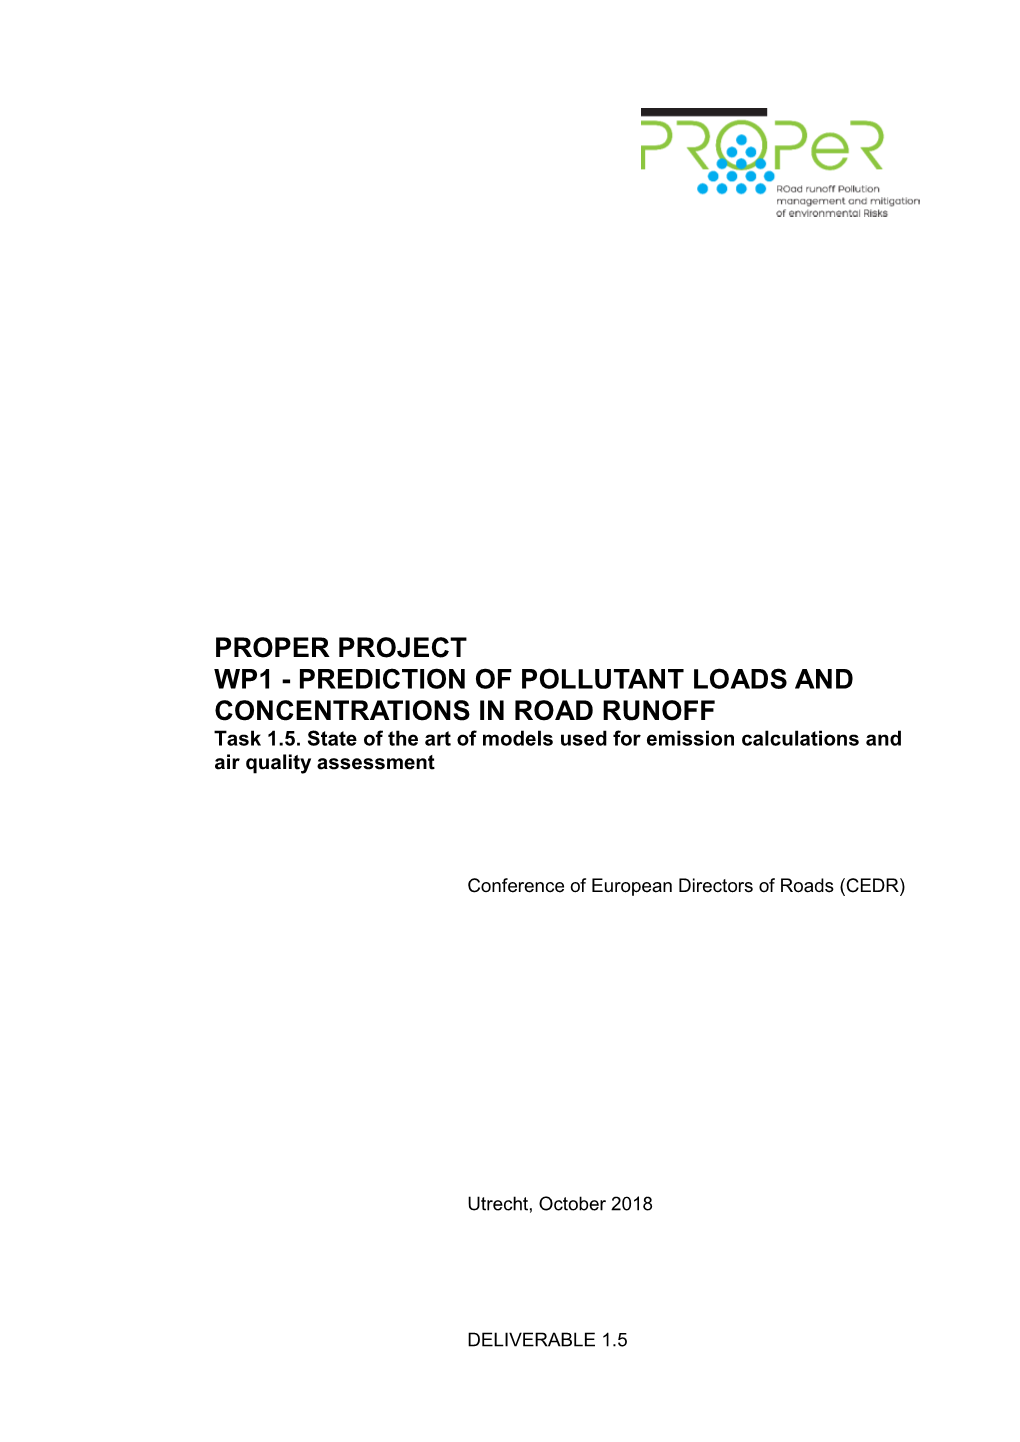 PREDICTION of POLLUTANT LOADS and CONCENTRATIONS in ROAD RUNOFF Task 1.5